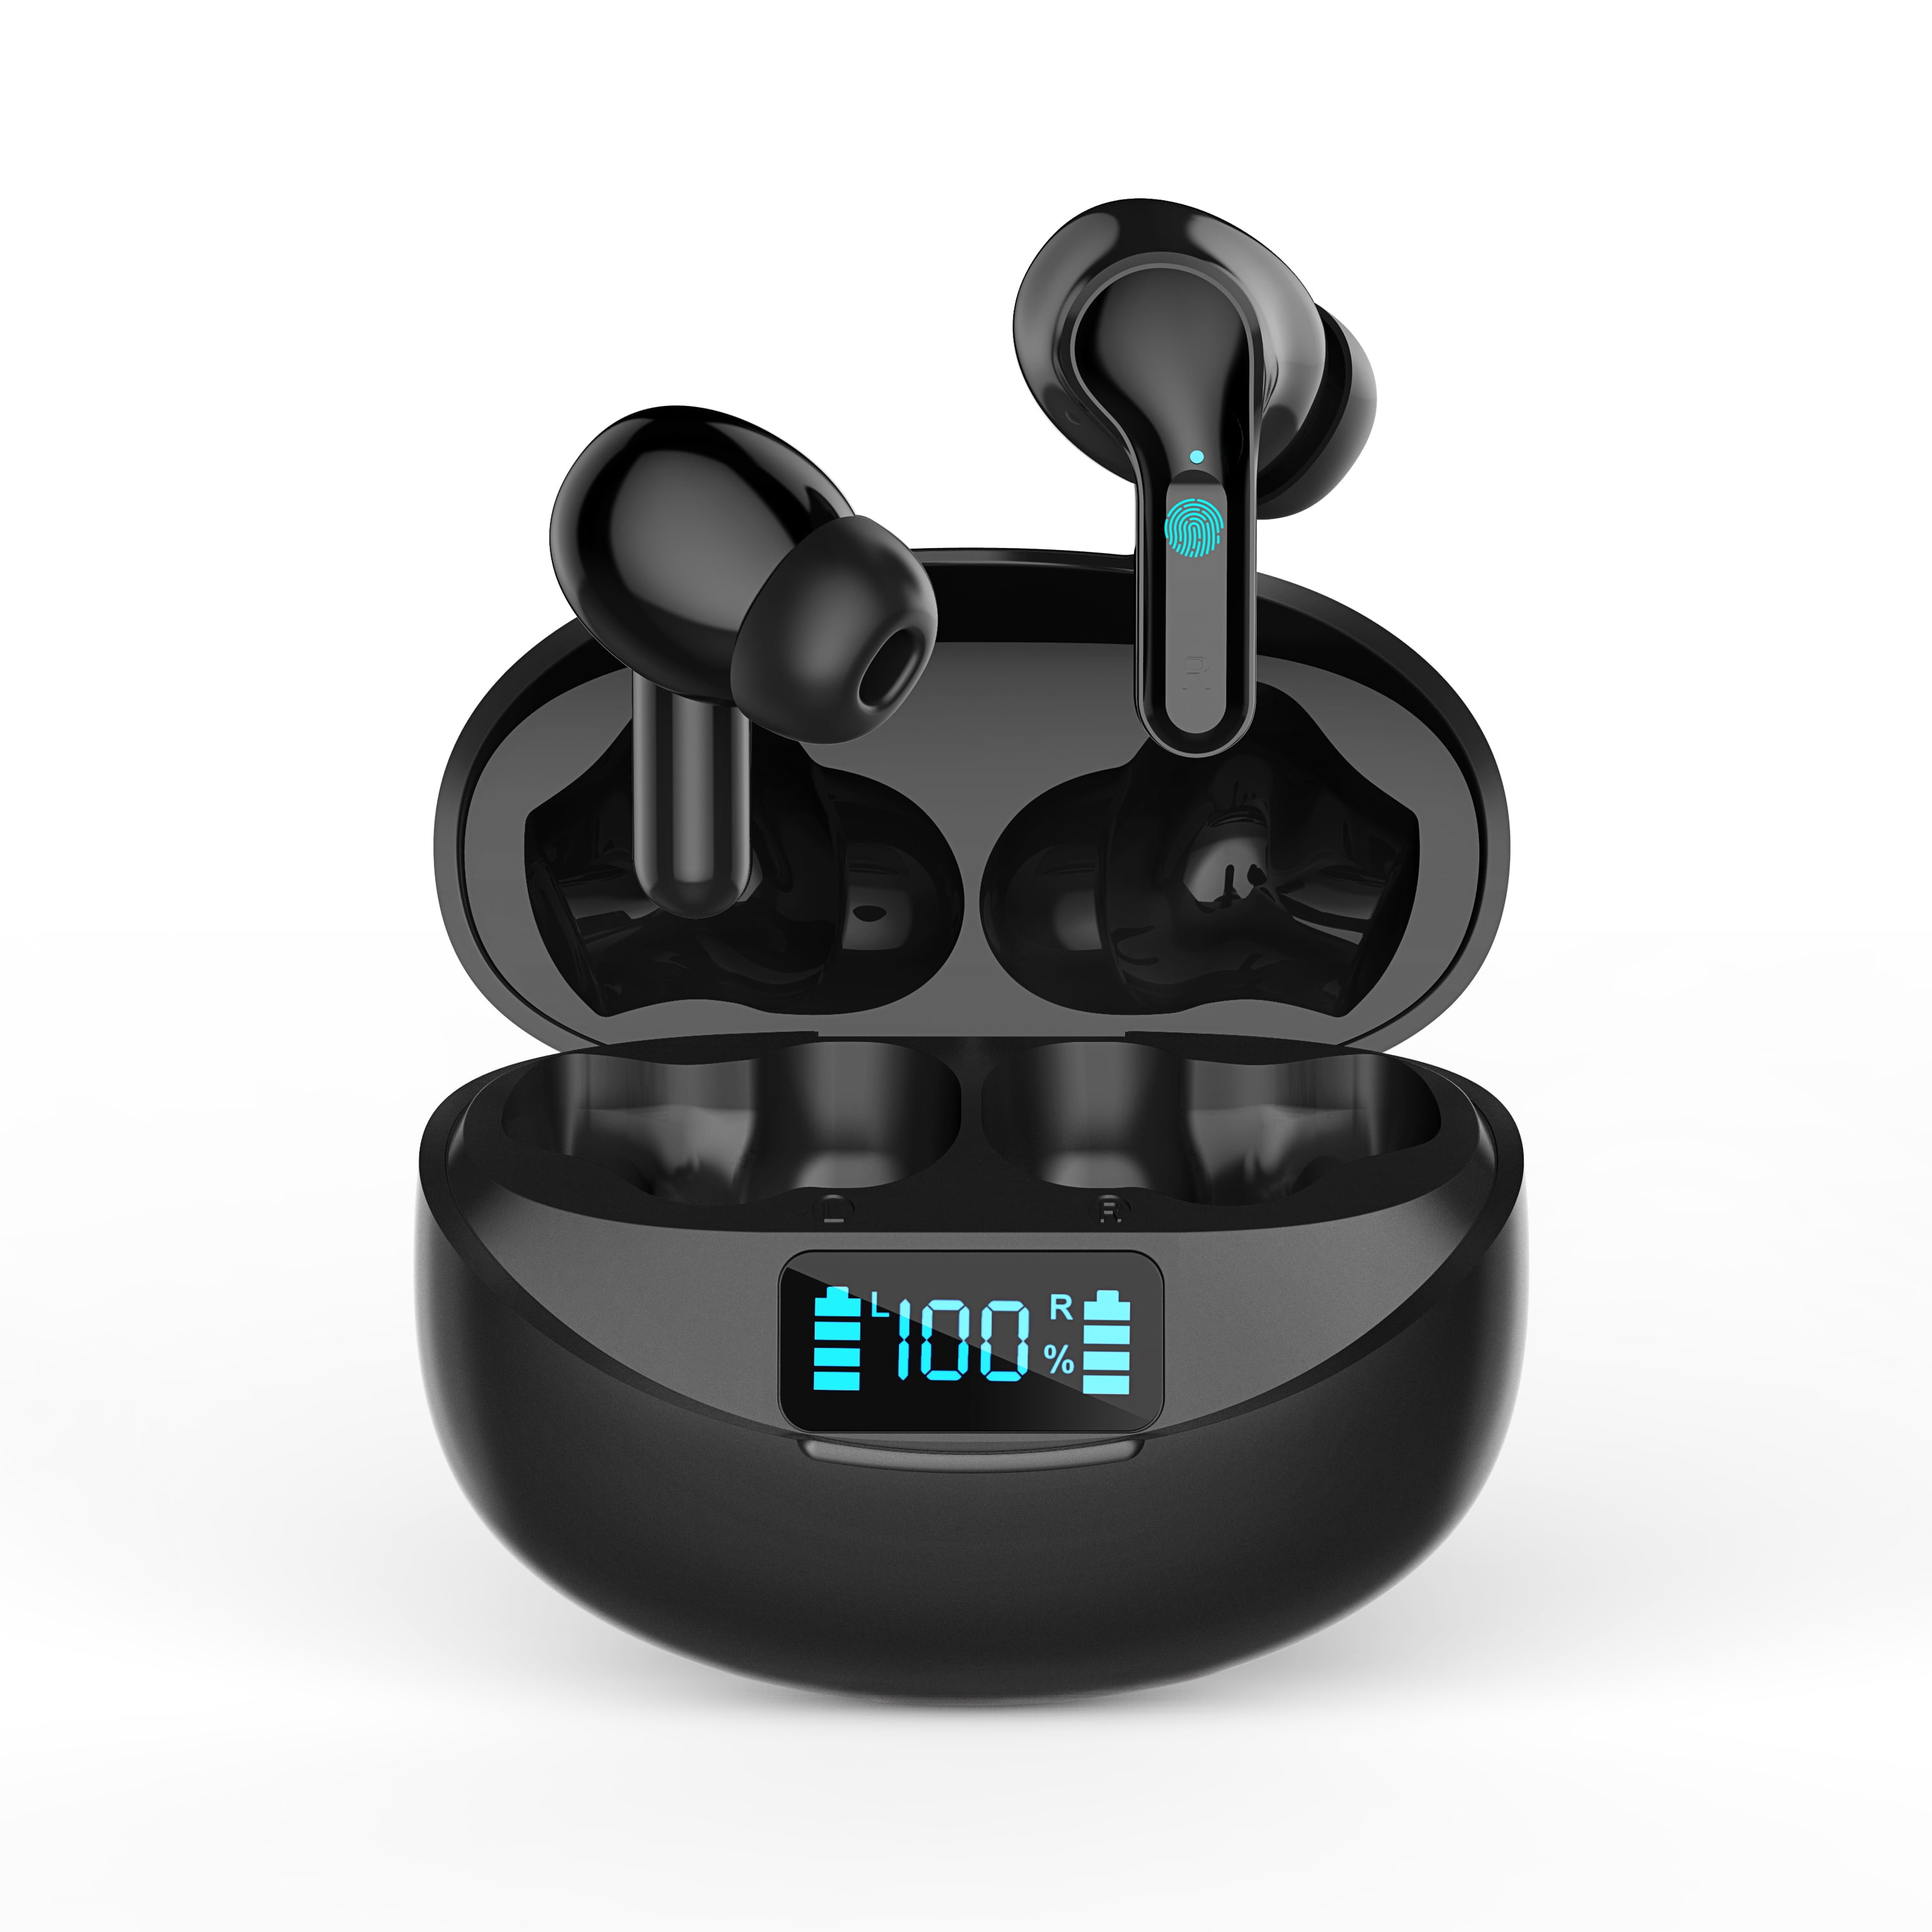 Xiaomi Redmi Buds 3 Pro True Wireless Airdots in-Ear Earbuds 35dB Smart  Noise Cancellation, 28 Hour Battery Life, Glacier Gray 